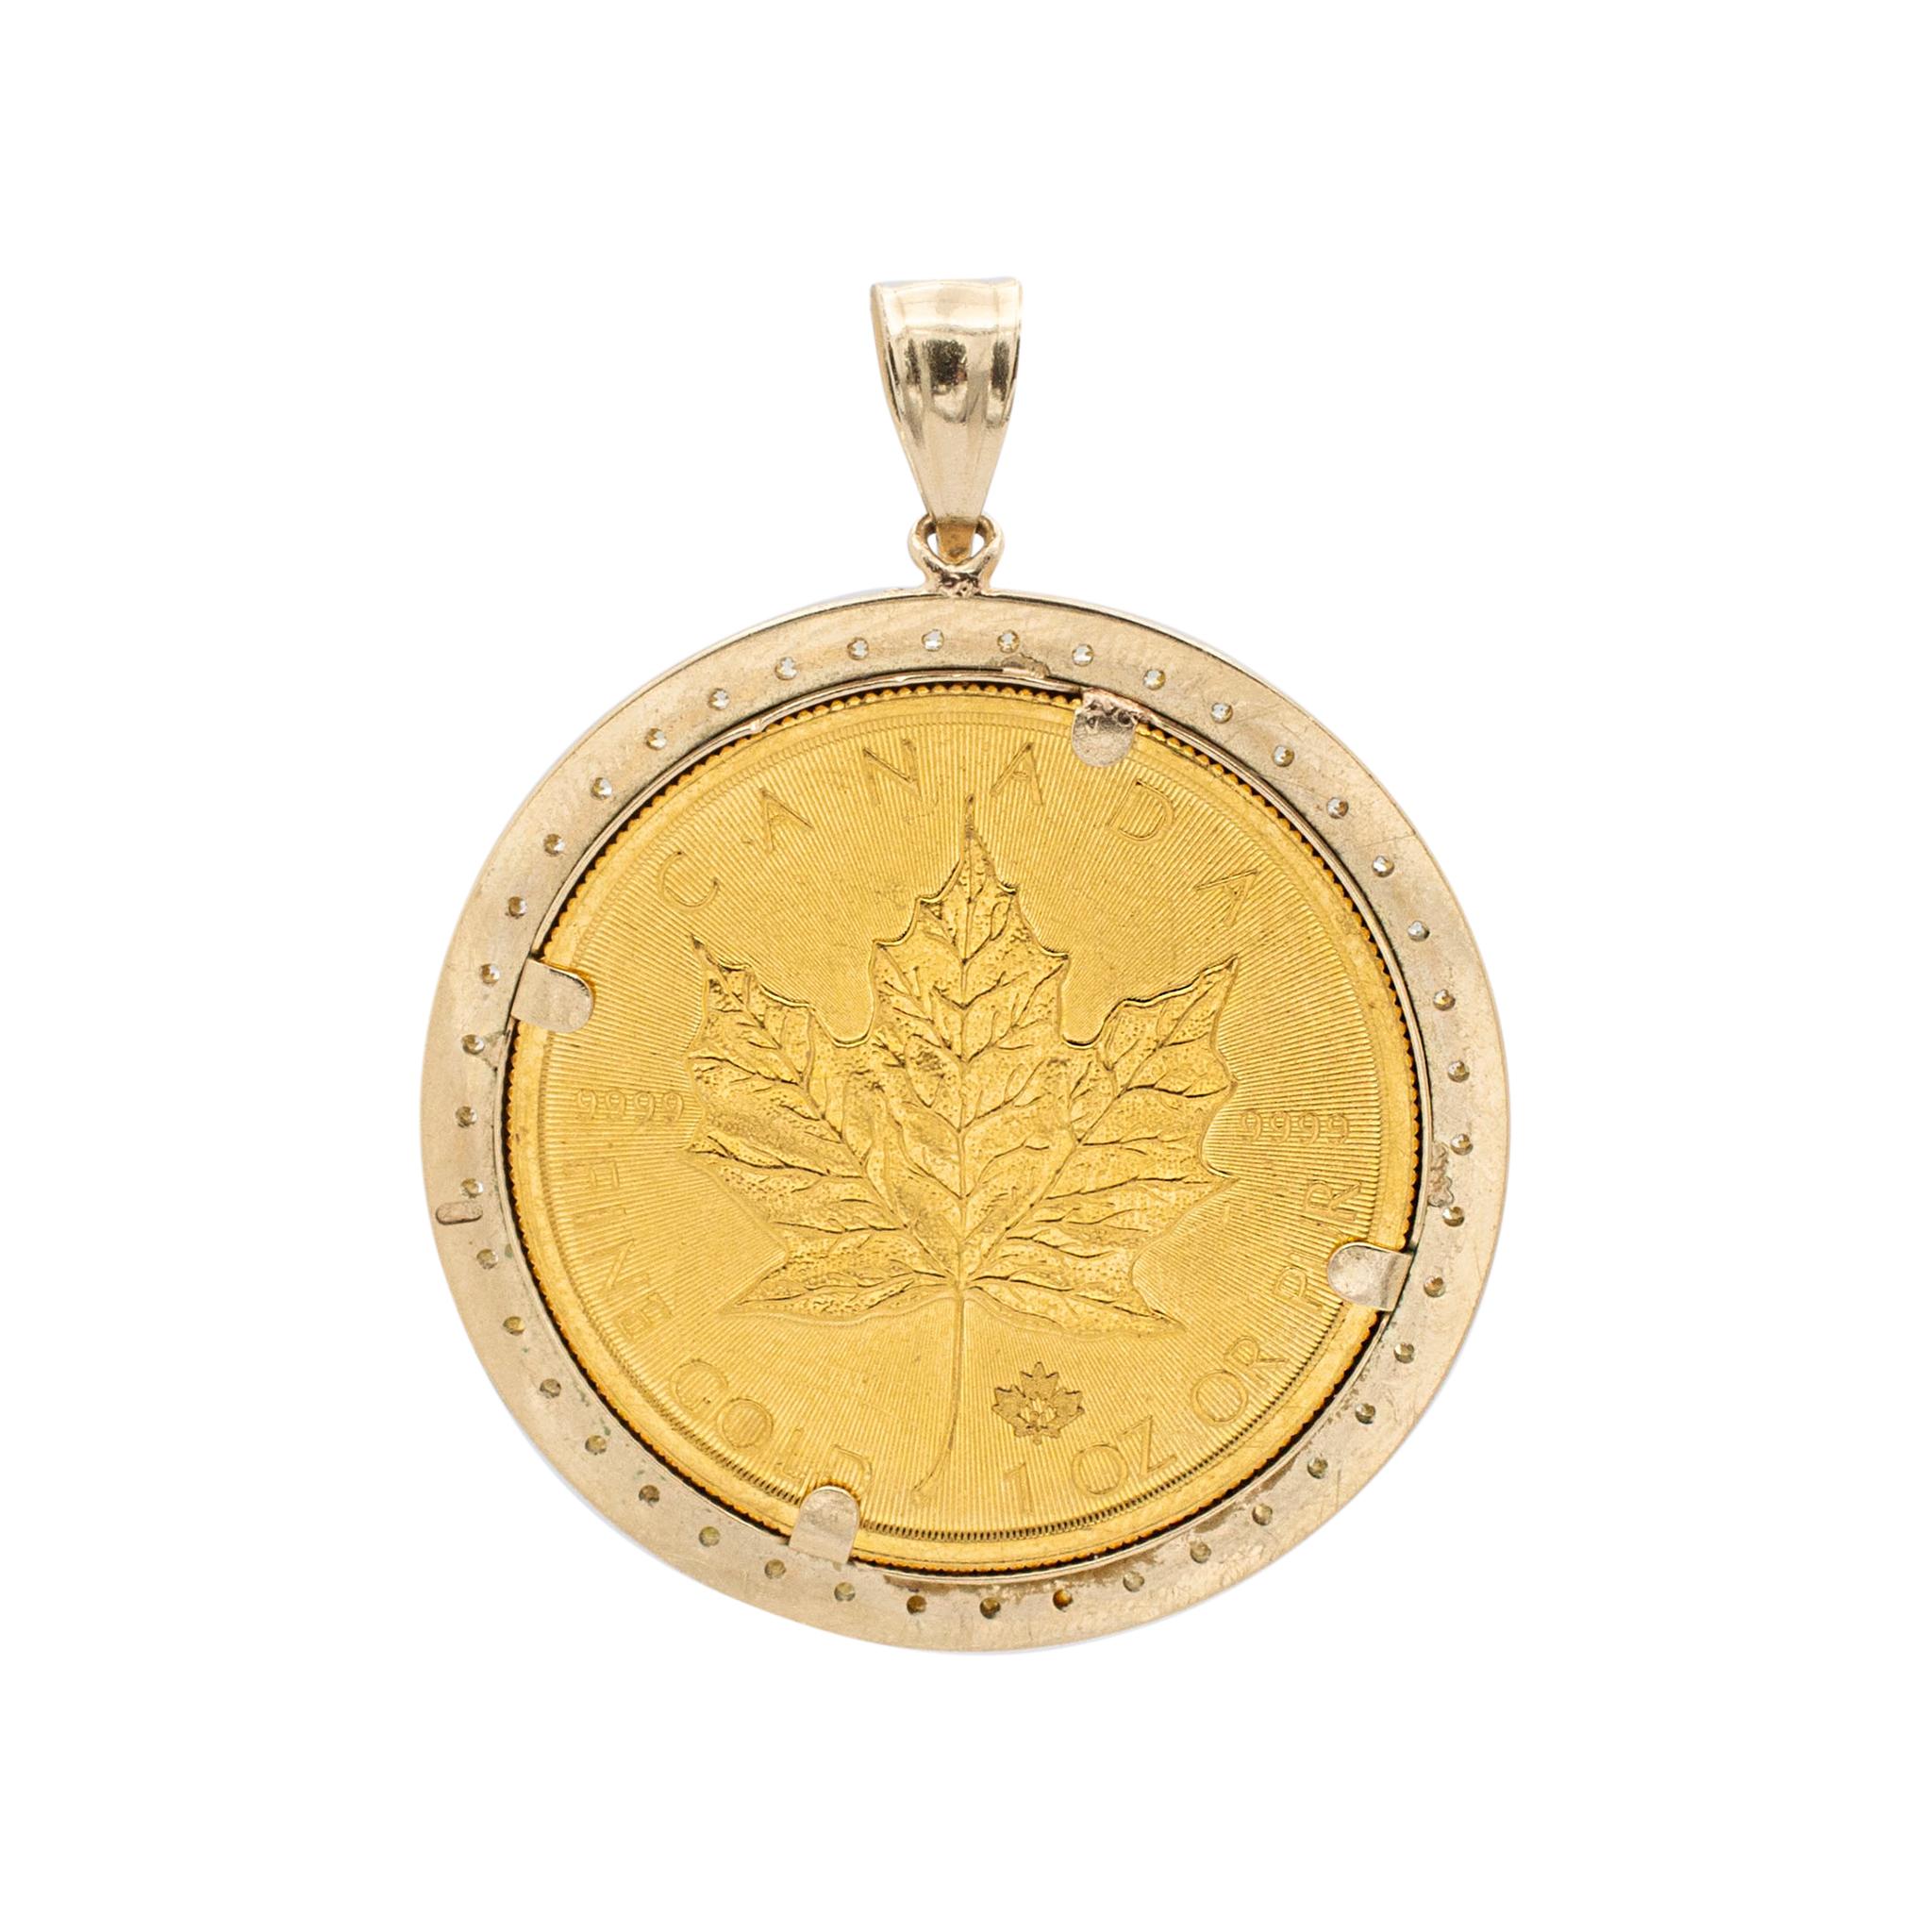 Gender: Unisex

Metal Type: 24K Yellow Gold

Length: 1.75 inches

Diameter: 35.00 mm

Total weight: 38.10 grams

14K yellow gold, diamond coin pendant . Engraved with 